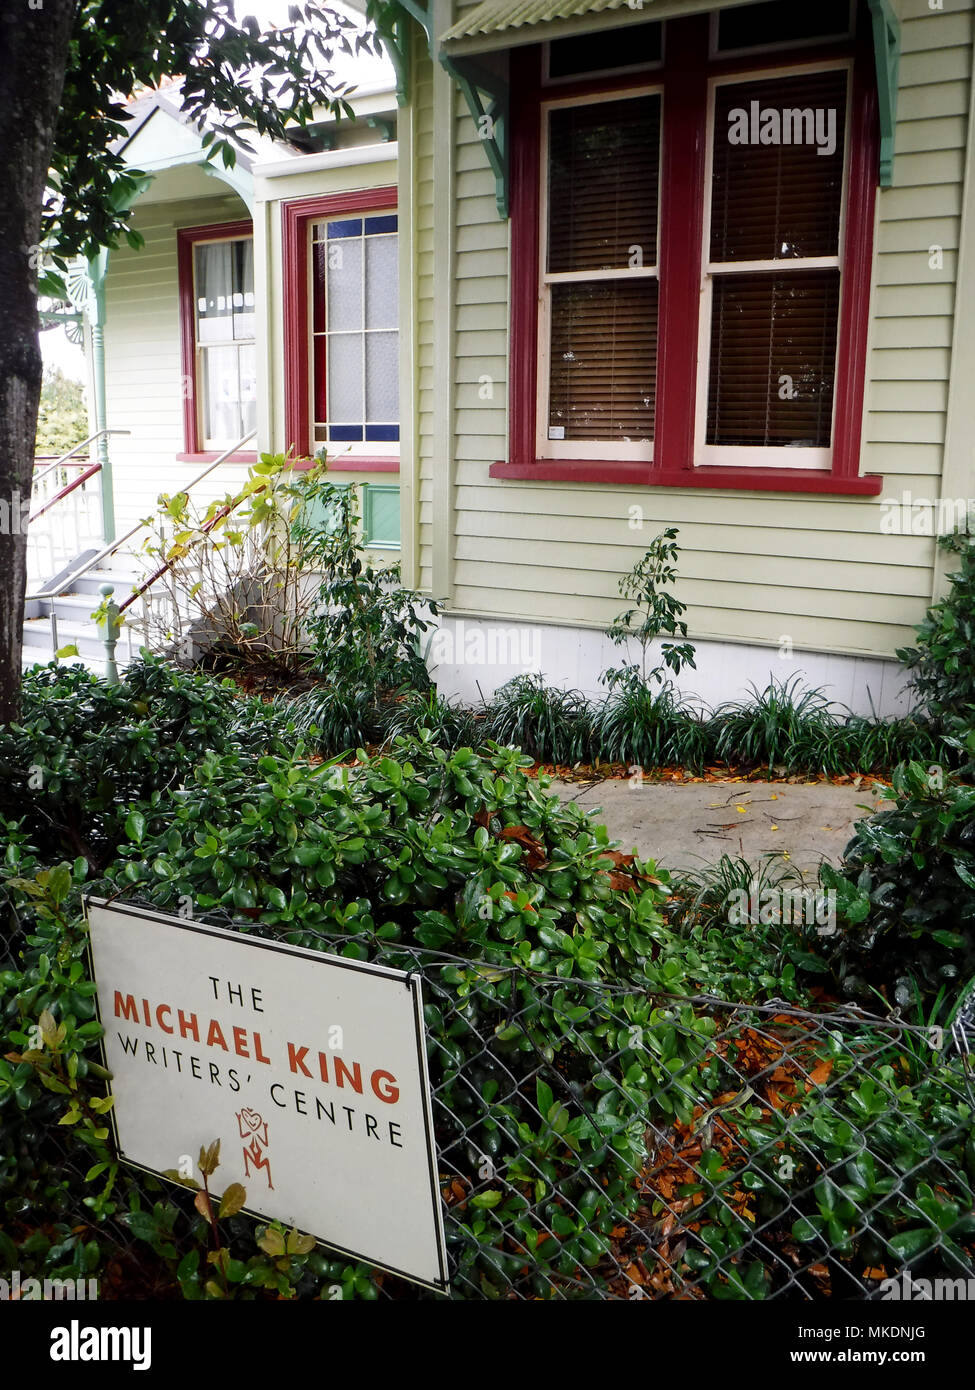 The Michael King writers centre at Mount Victoria New Zealand Stock Photo